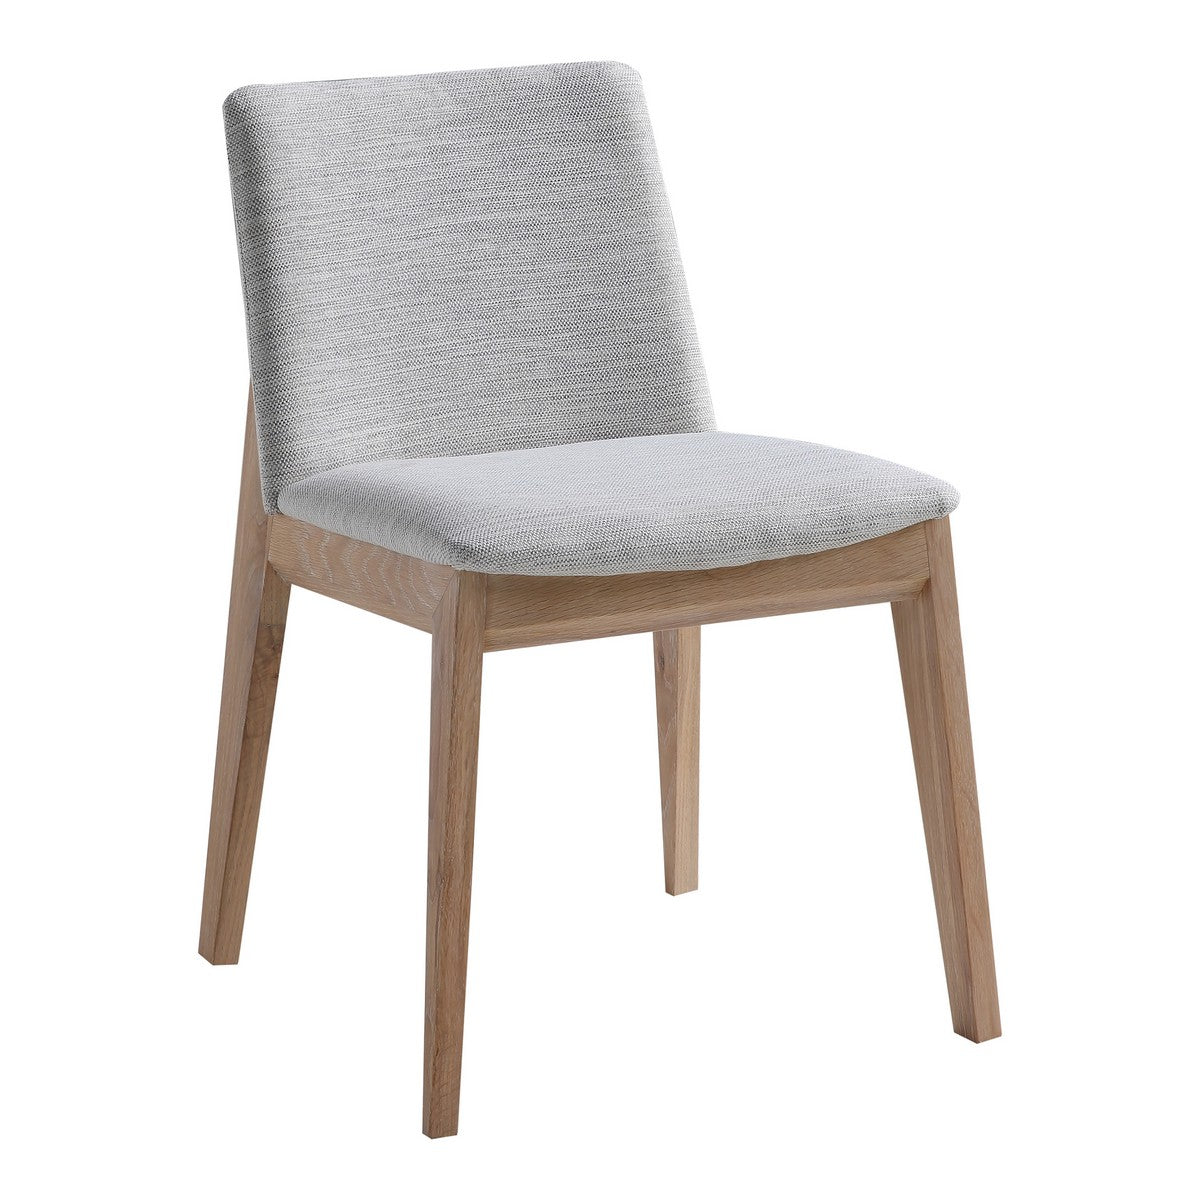 Moe's Home Collection Deco Oak Dining Chair Light Grey-Set of Two - BC-1086-29 - Moe's Home Collection - Dining Chairs - Minimal And Modern - 1